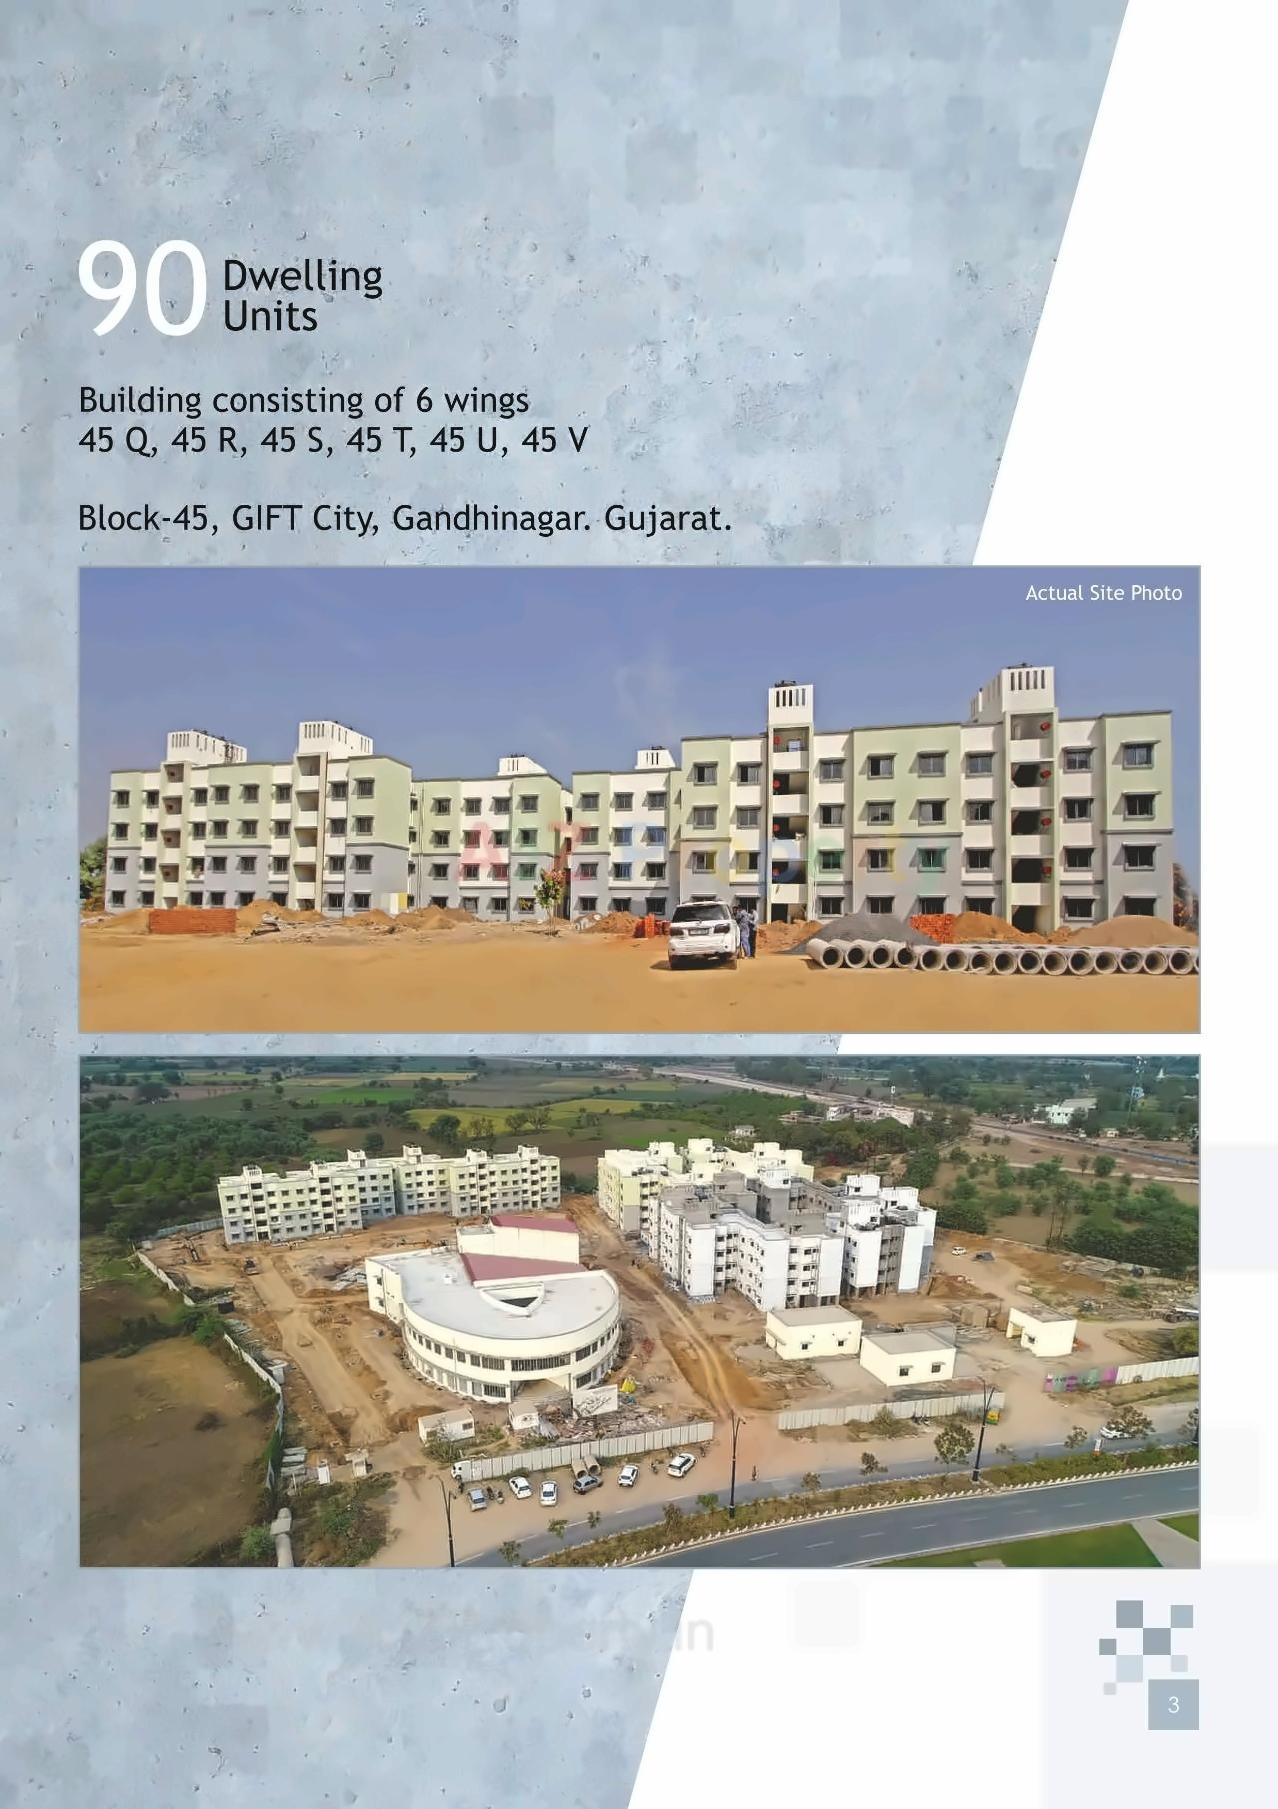 Megaproject: Gujarat International Finance Tec-City (GIFT) -- General  Development News and Discussions | Page 383 | SkyscraperCity Forum